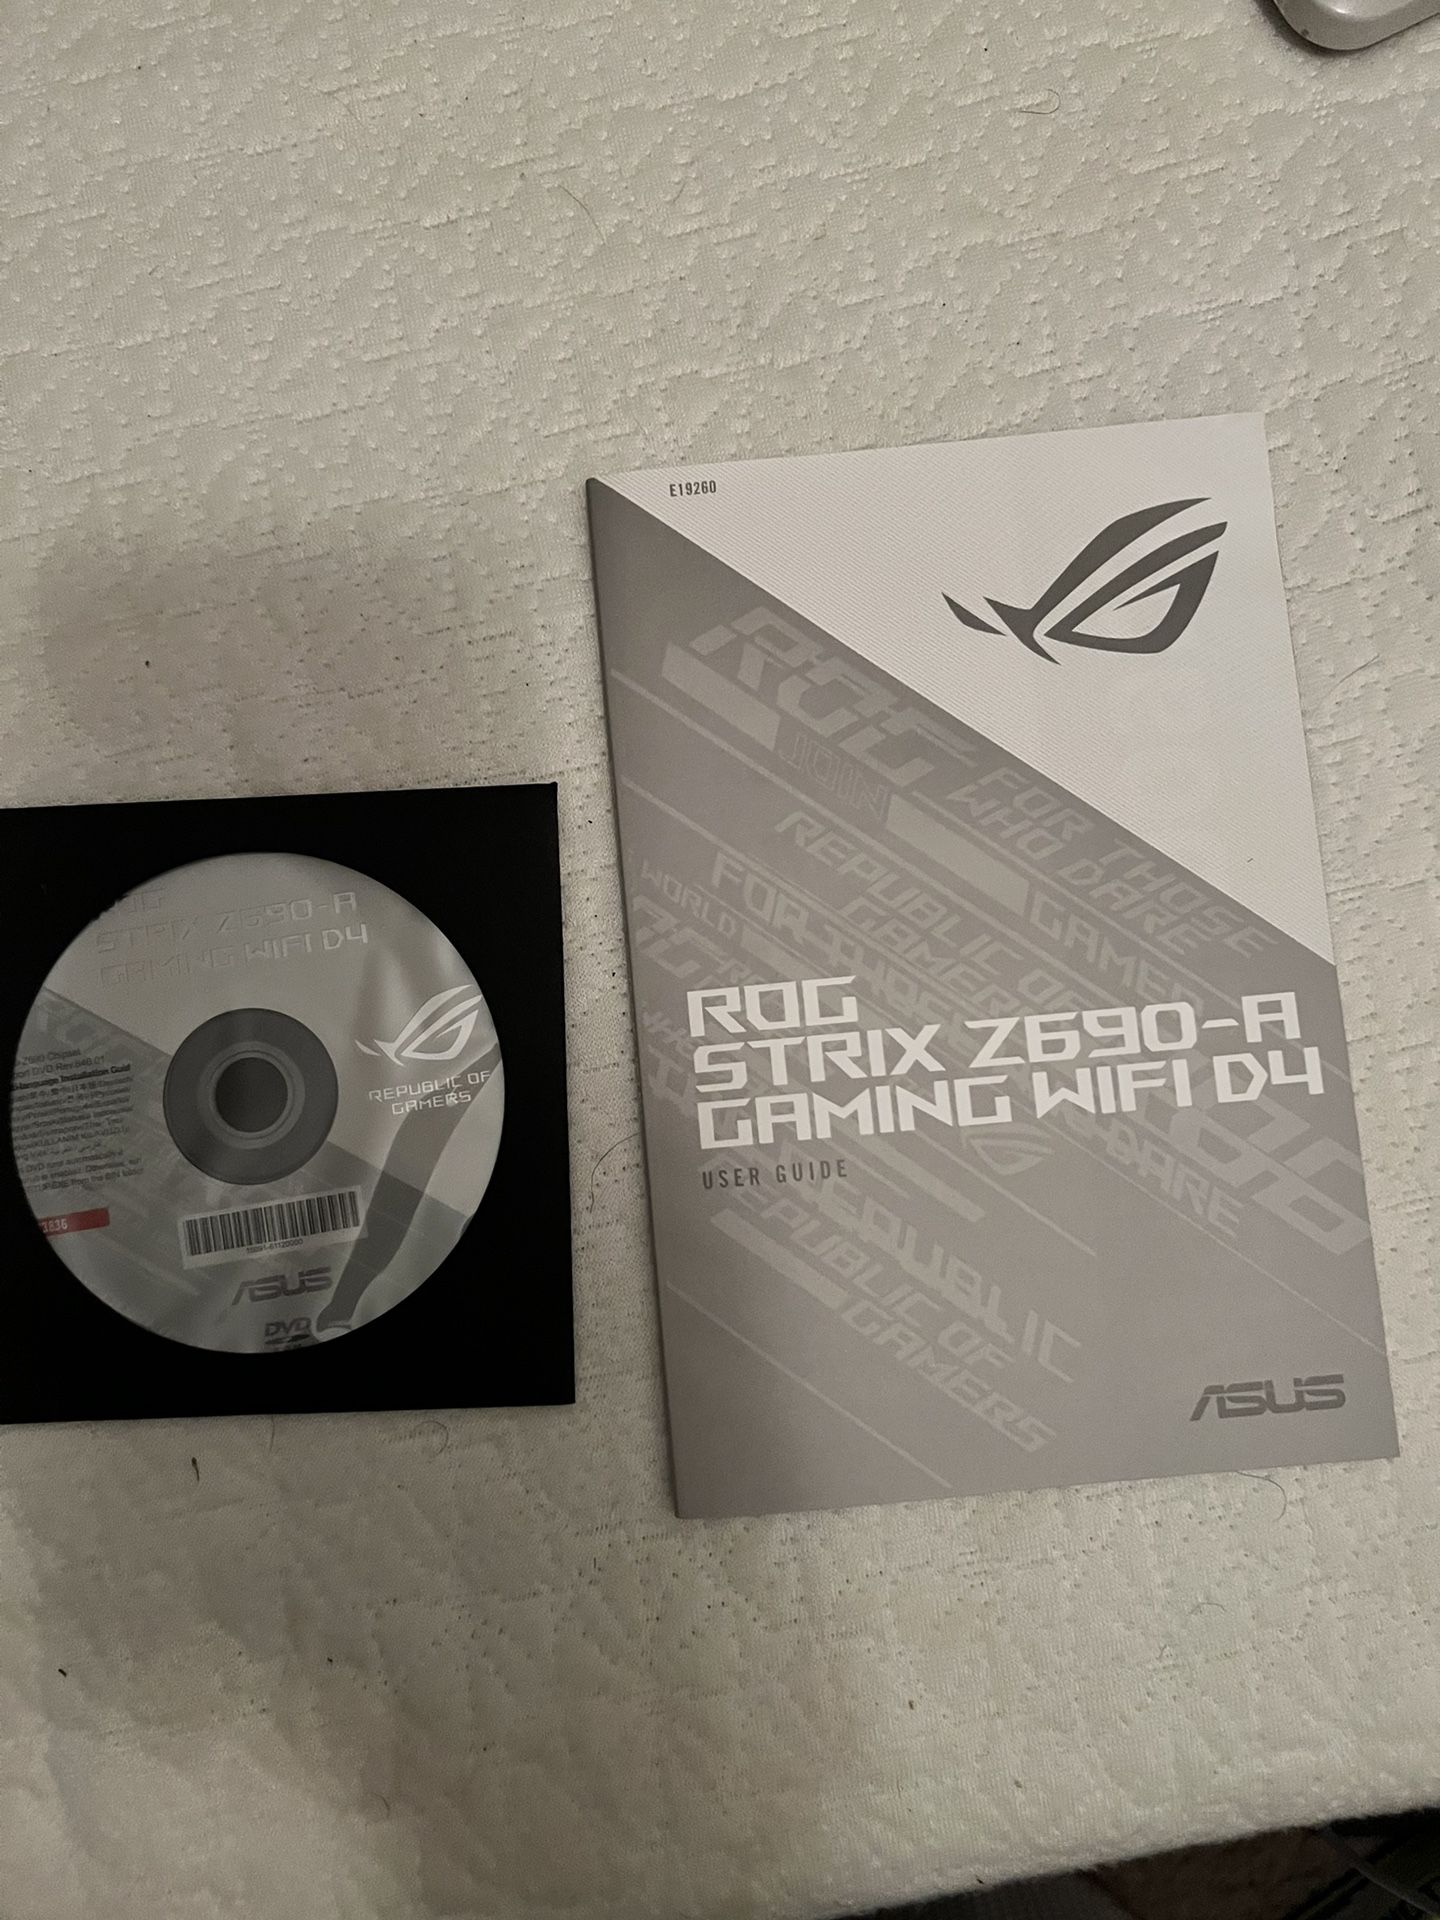 ROG STRYX Z690-A GAMING WIFI D4 USER GUIDE AND SOFTWARE CD